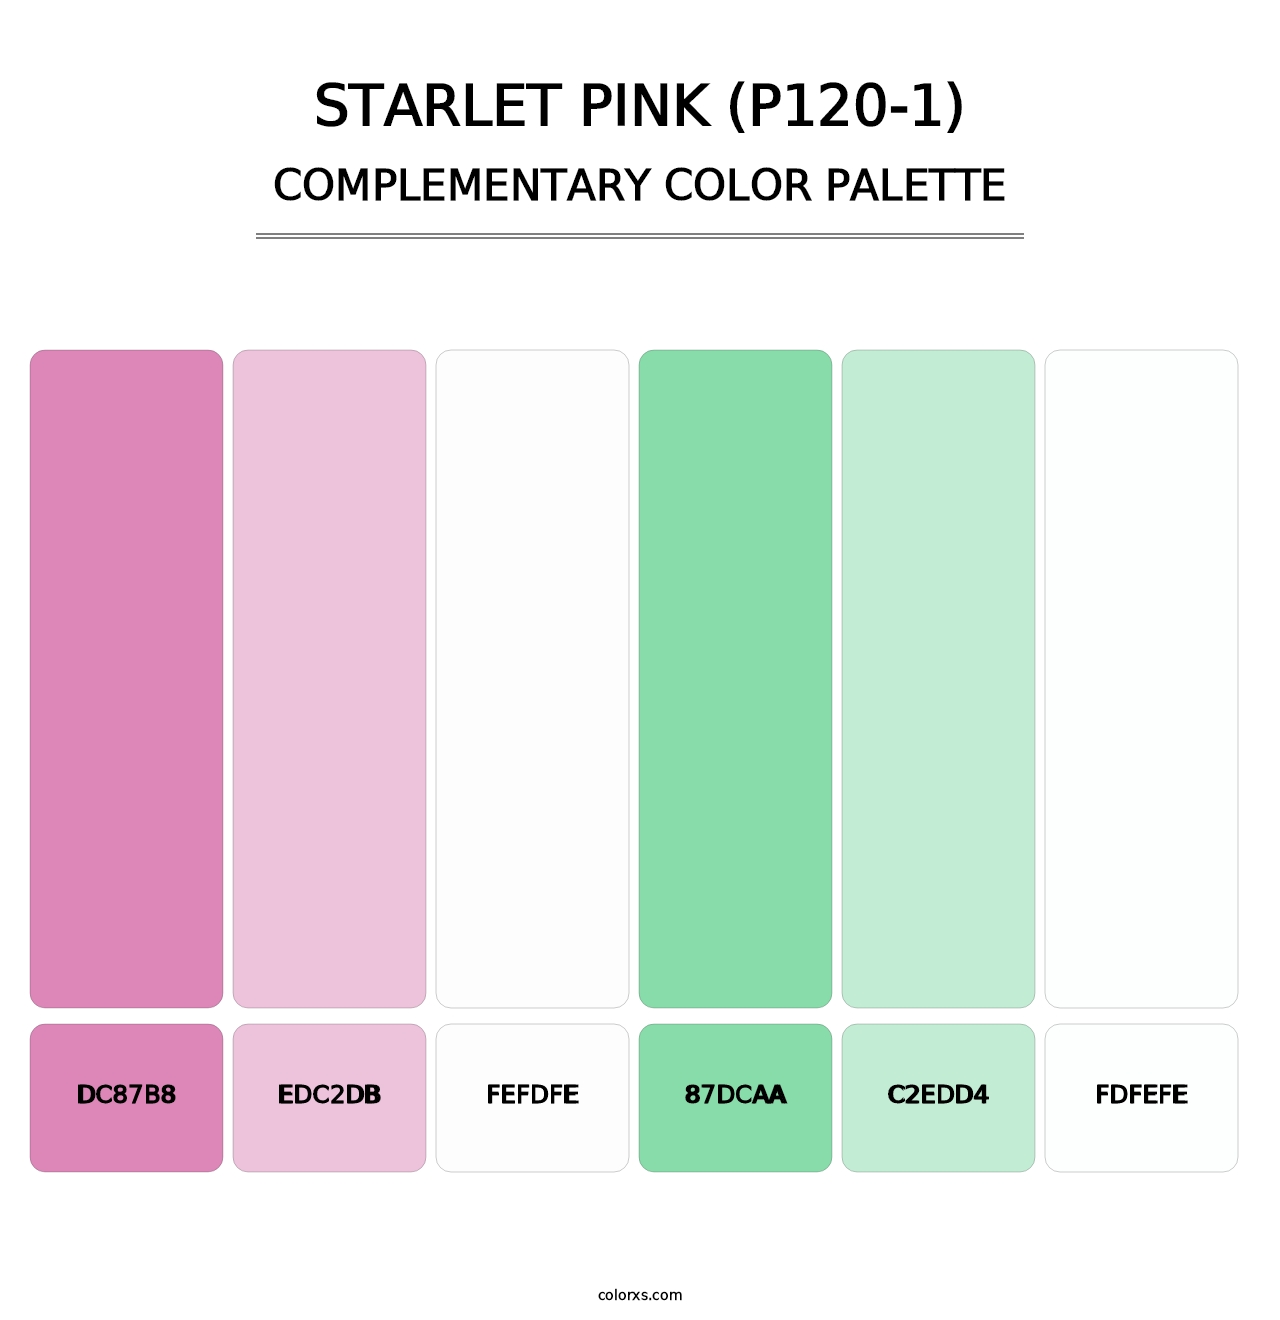 Starlet Pink (P120-1) - Complementary Color Palette